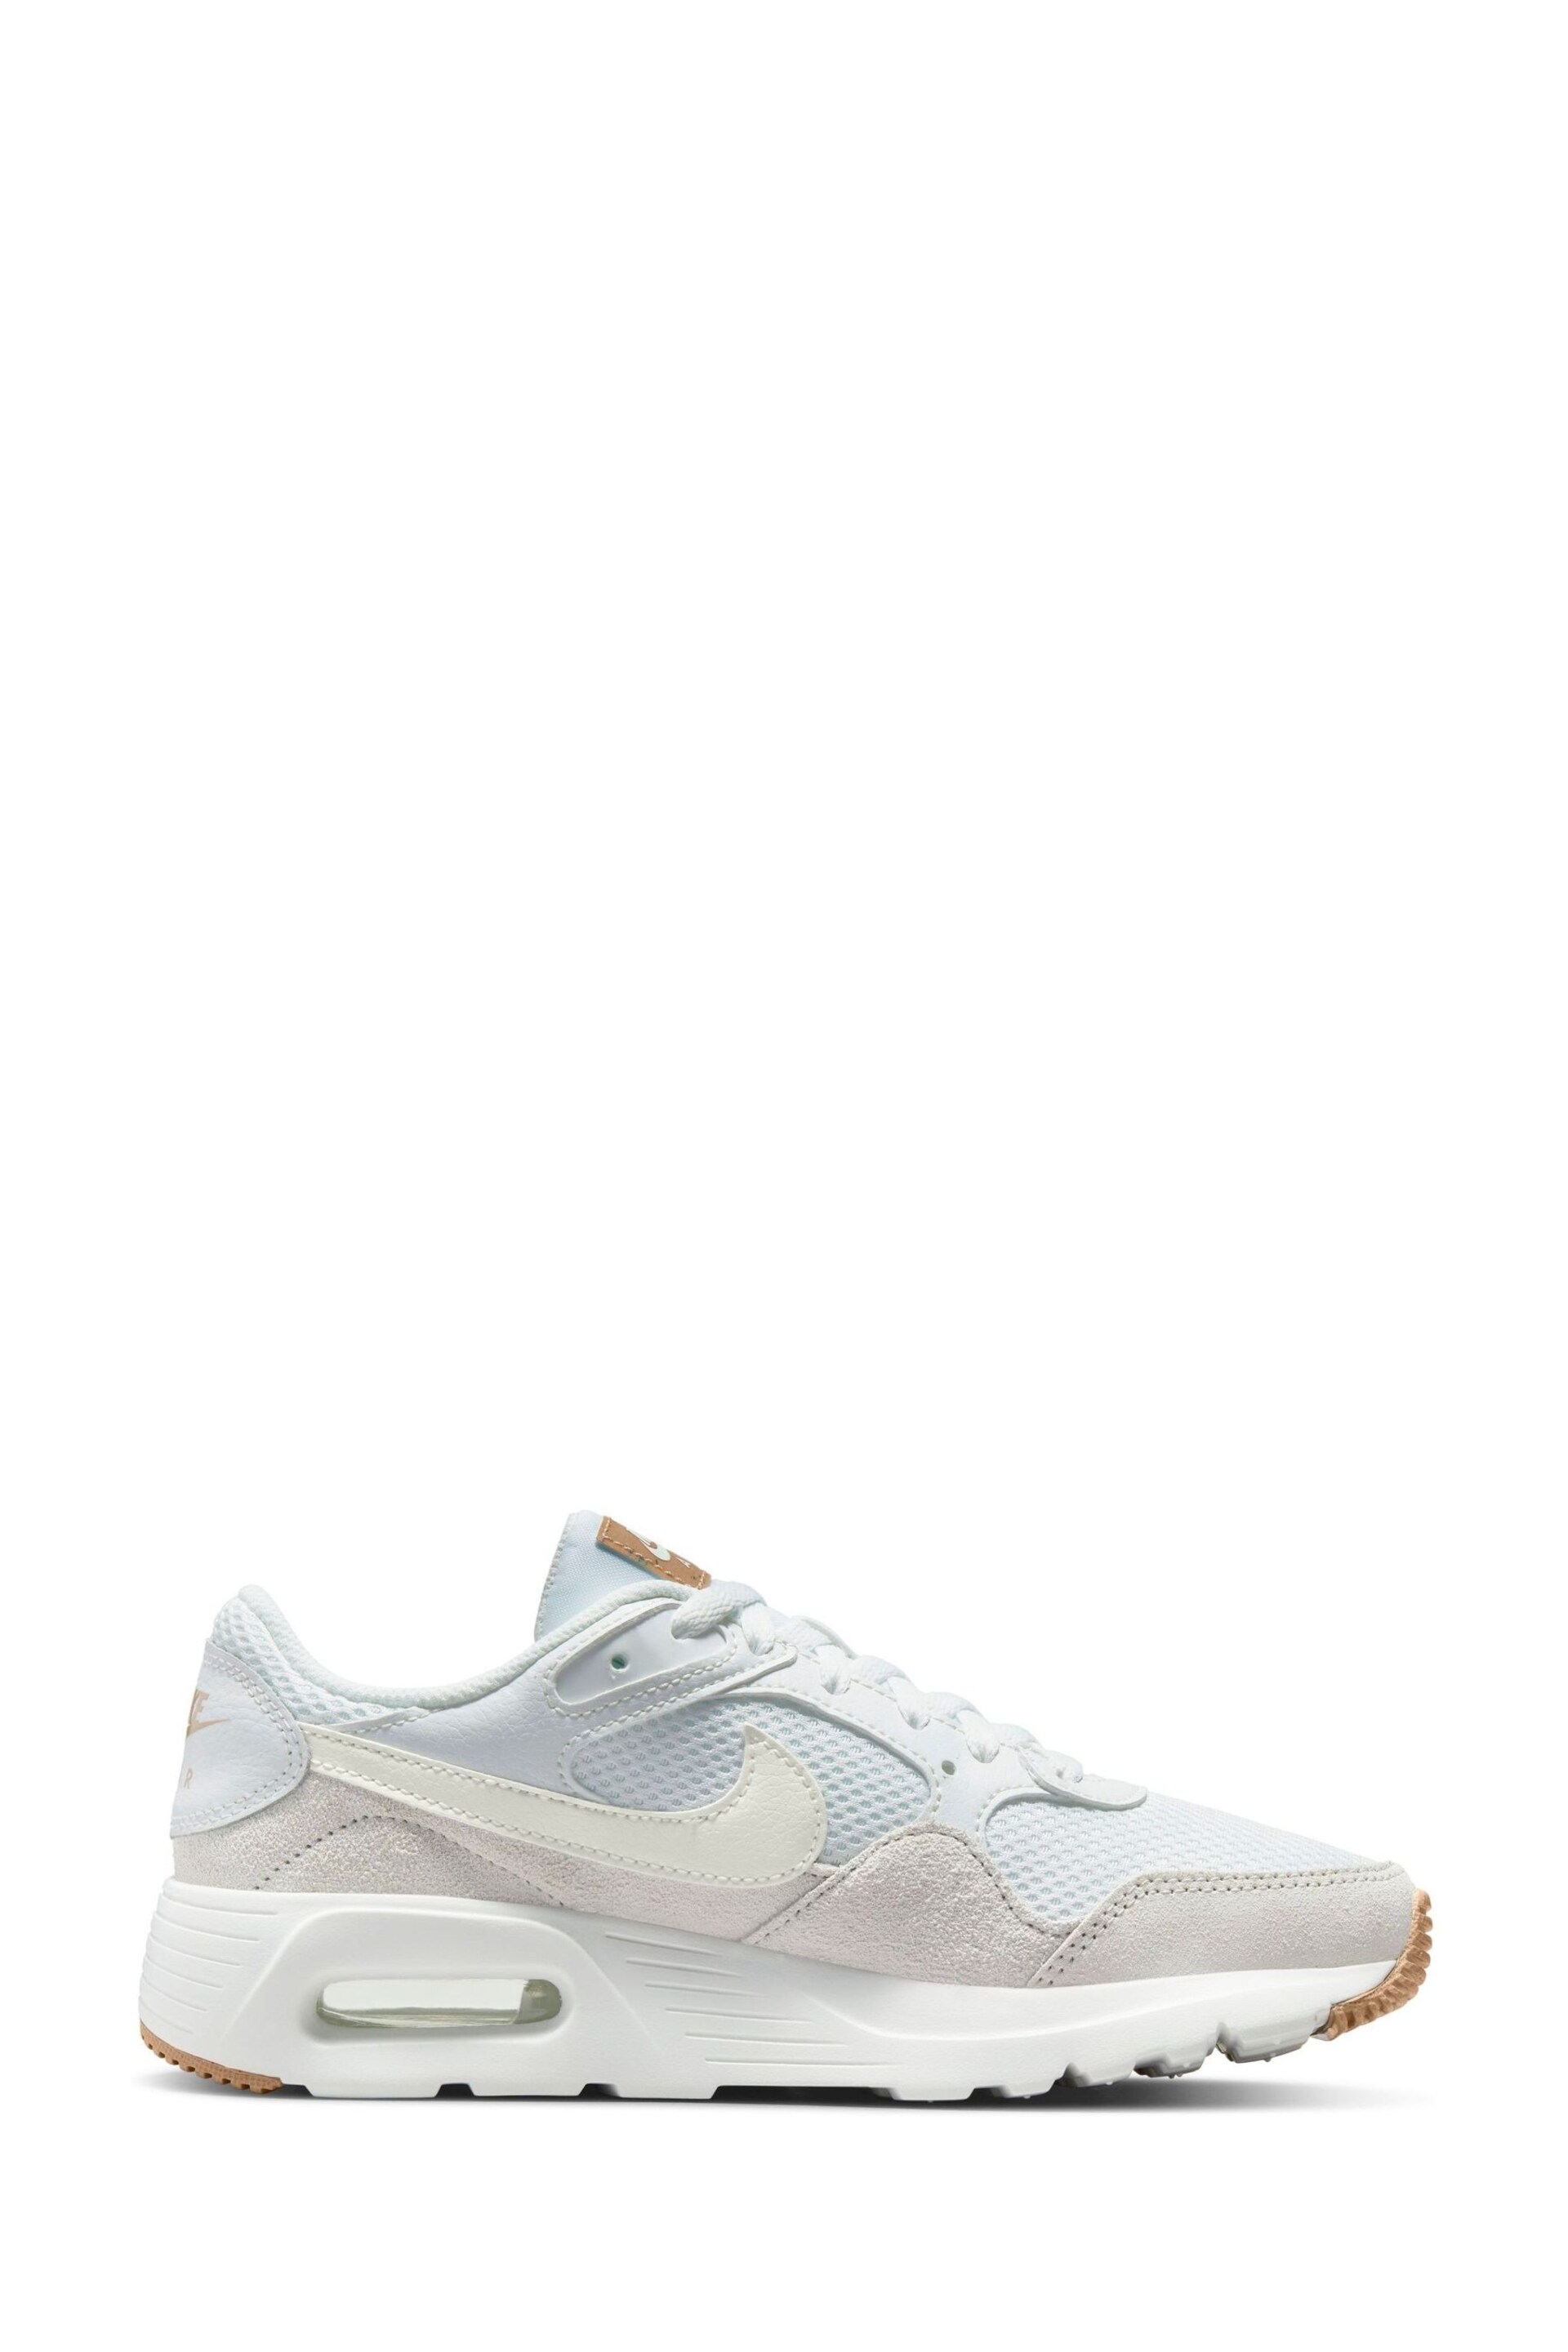 Nike White Air Max SC Trainers - Image 1 of 9